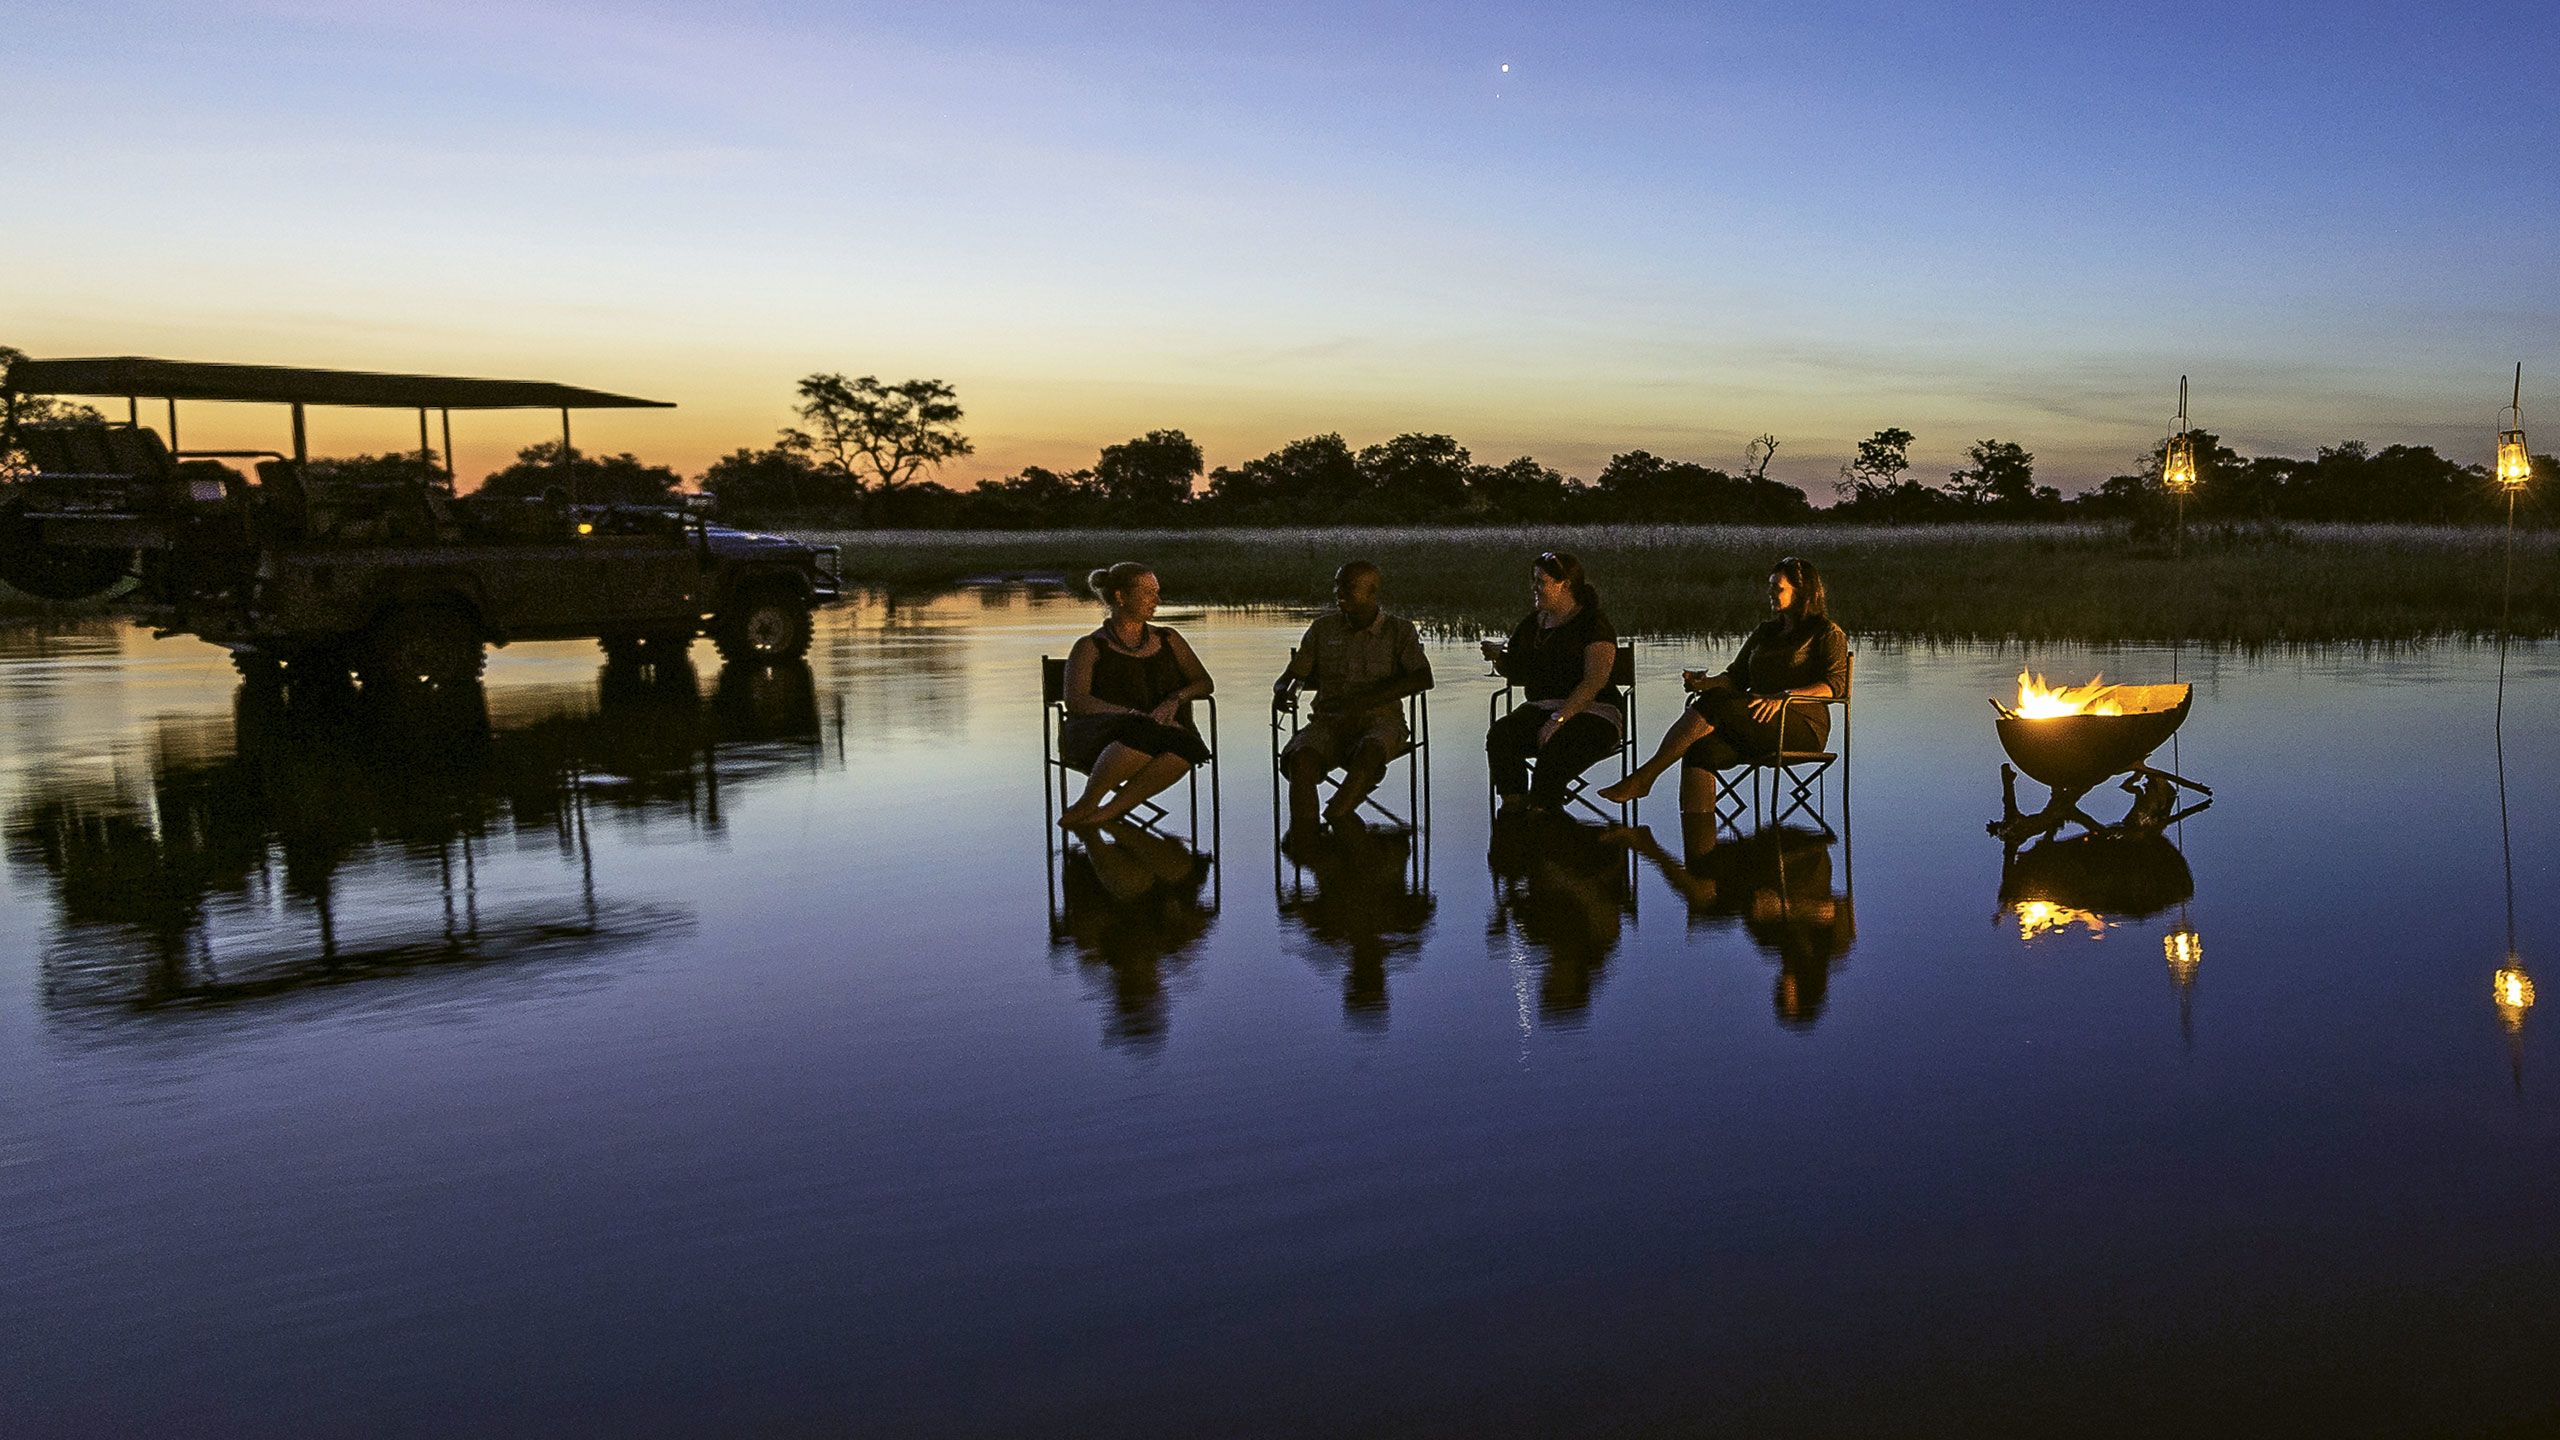 Sunset drinks in the Okavango Delta. Hard-to-reach destinations where travelers can enjoy wilderness without crowds make for unique luxury experiences. Photo courtesy of Wilderness Safaris/Dana Allen